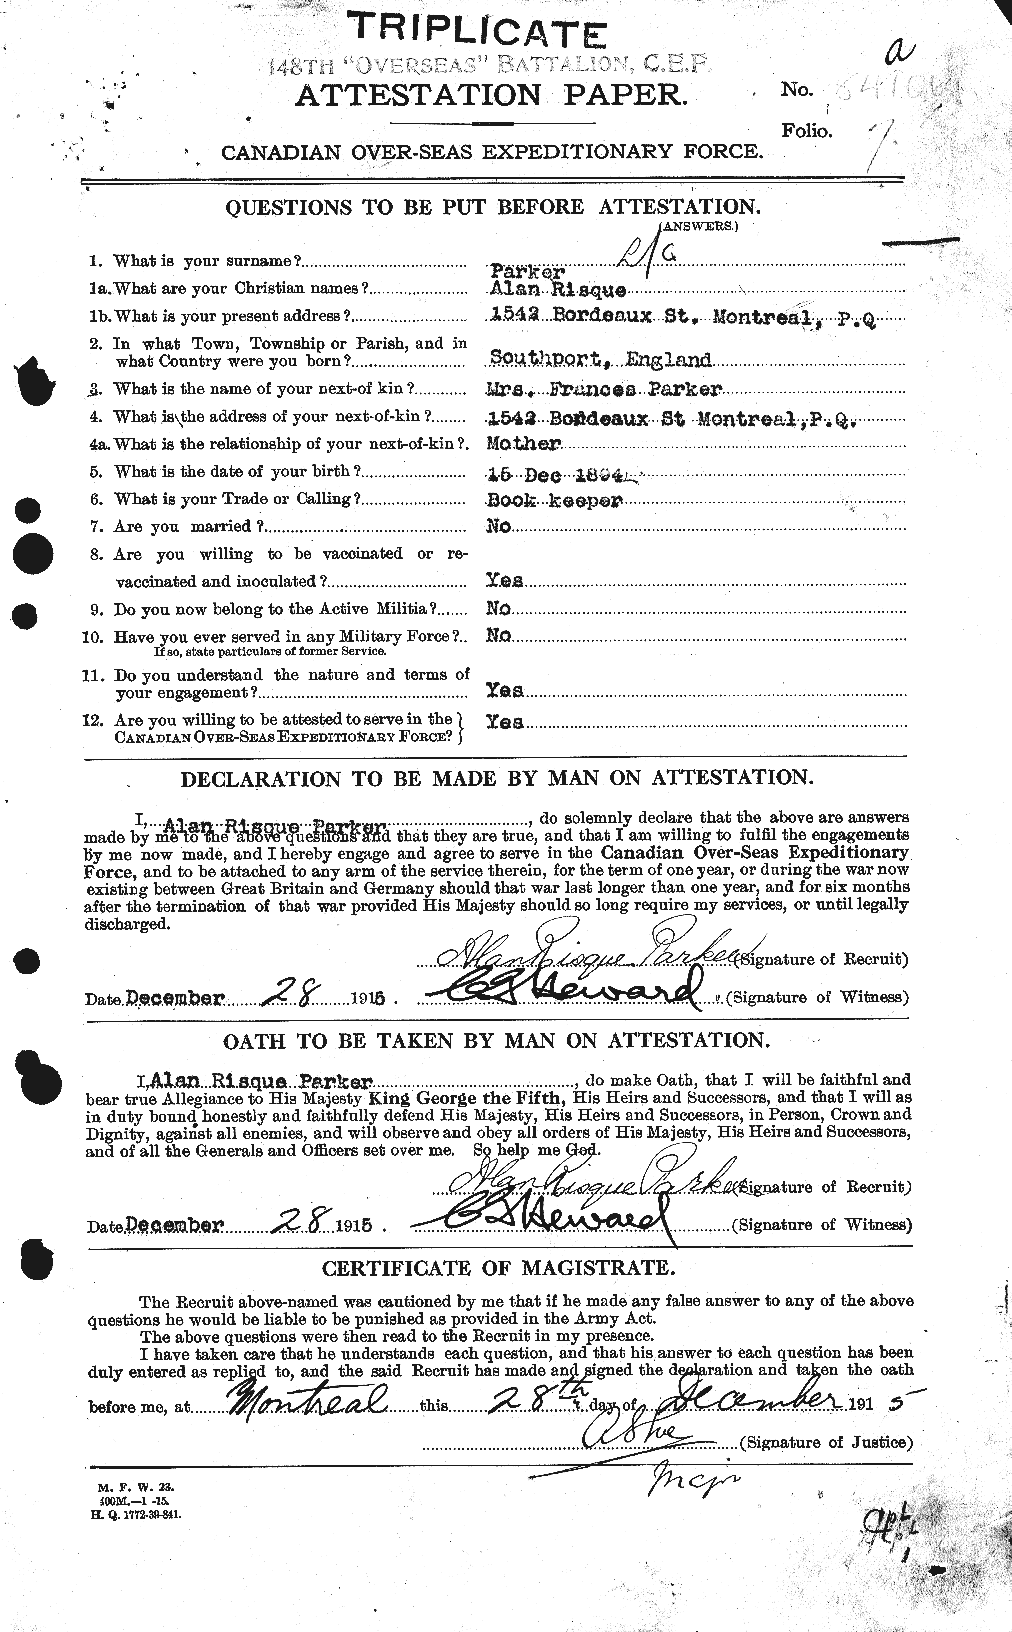 Personnel Records of the First World War - CEF 564957a